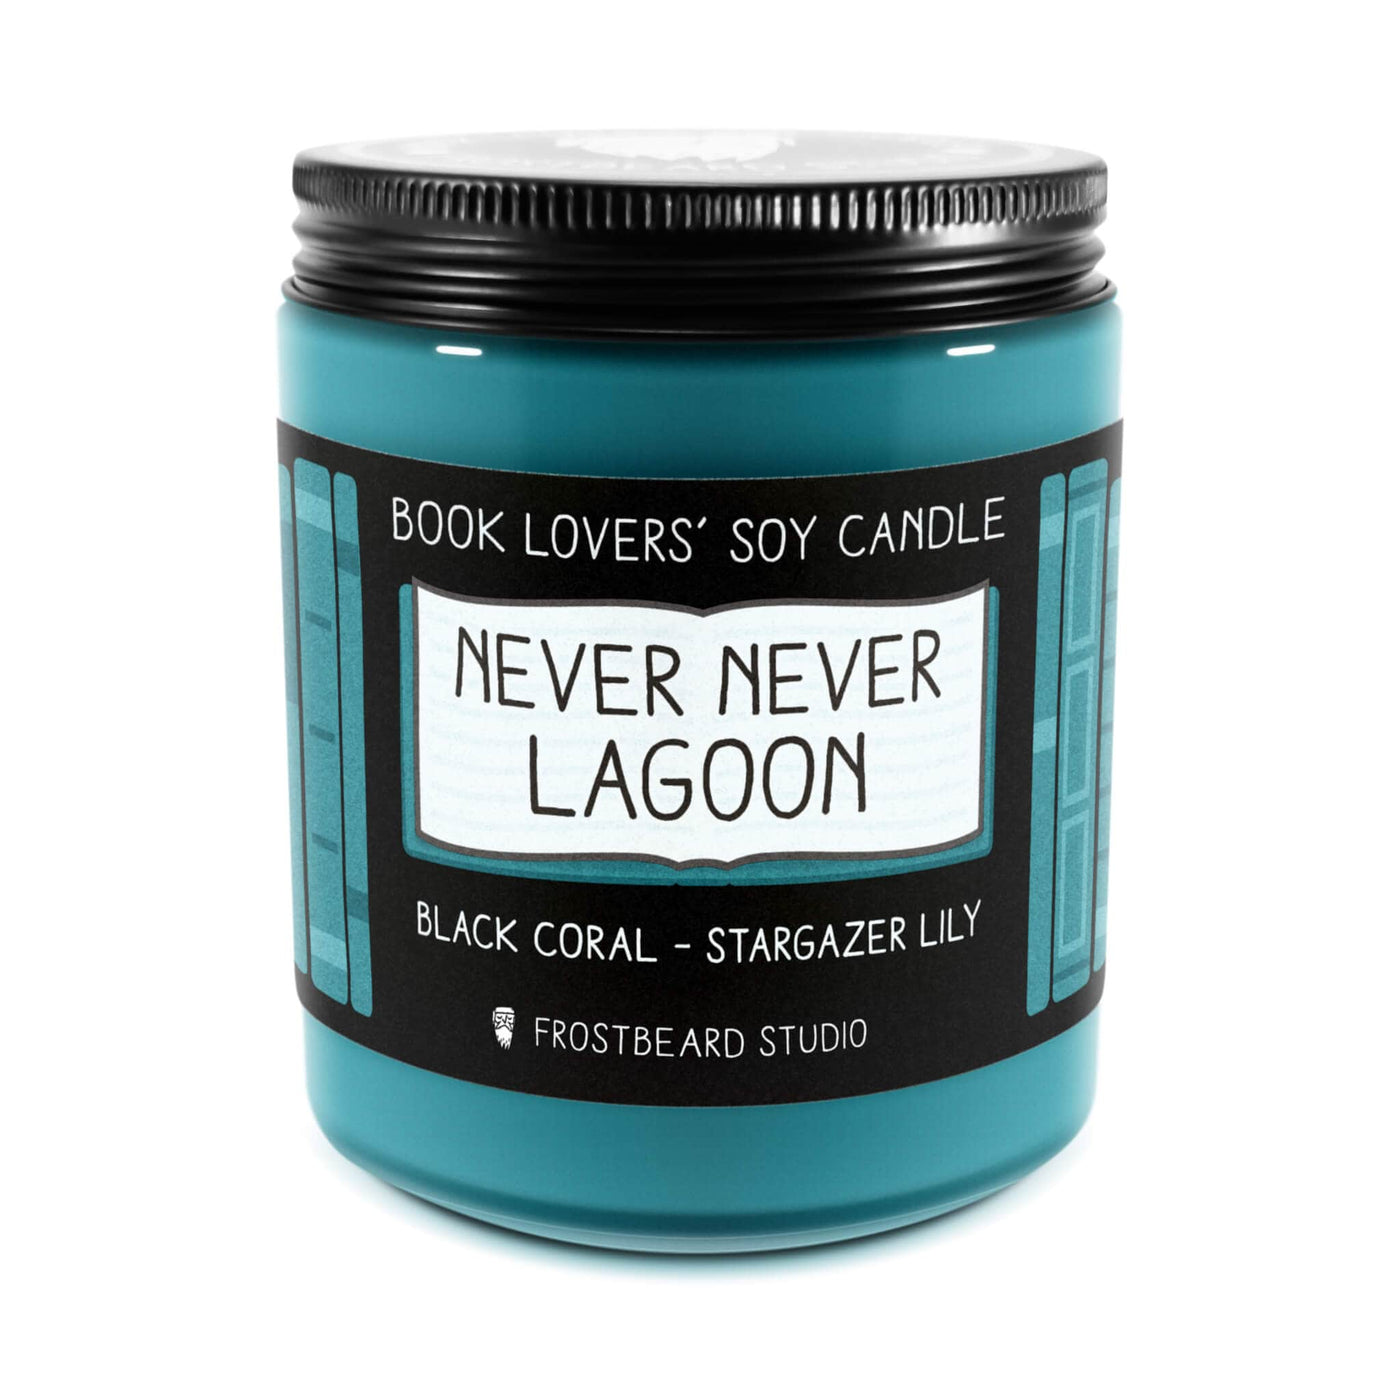 Never Never Lagoon - 8 oz Jar - Book Lovers' Soy Candle - Frostbeard Studio